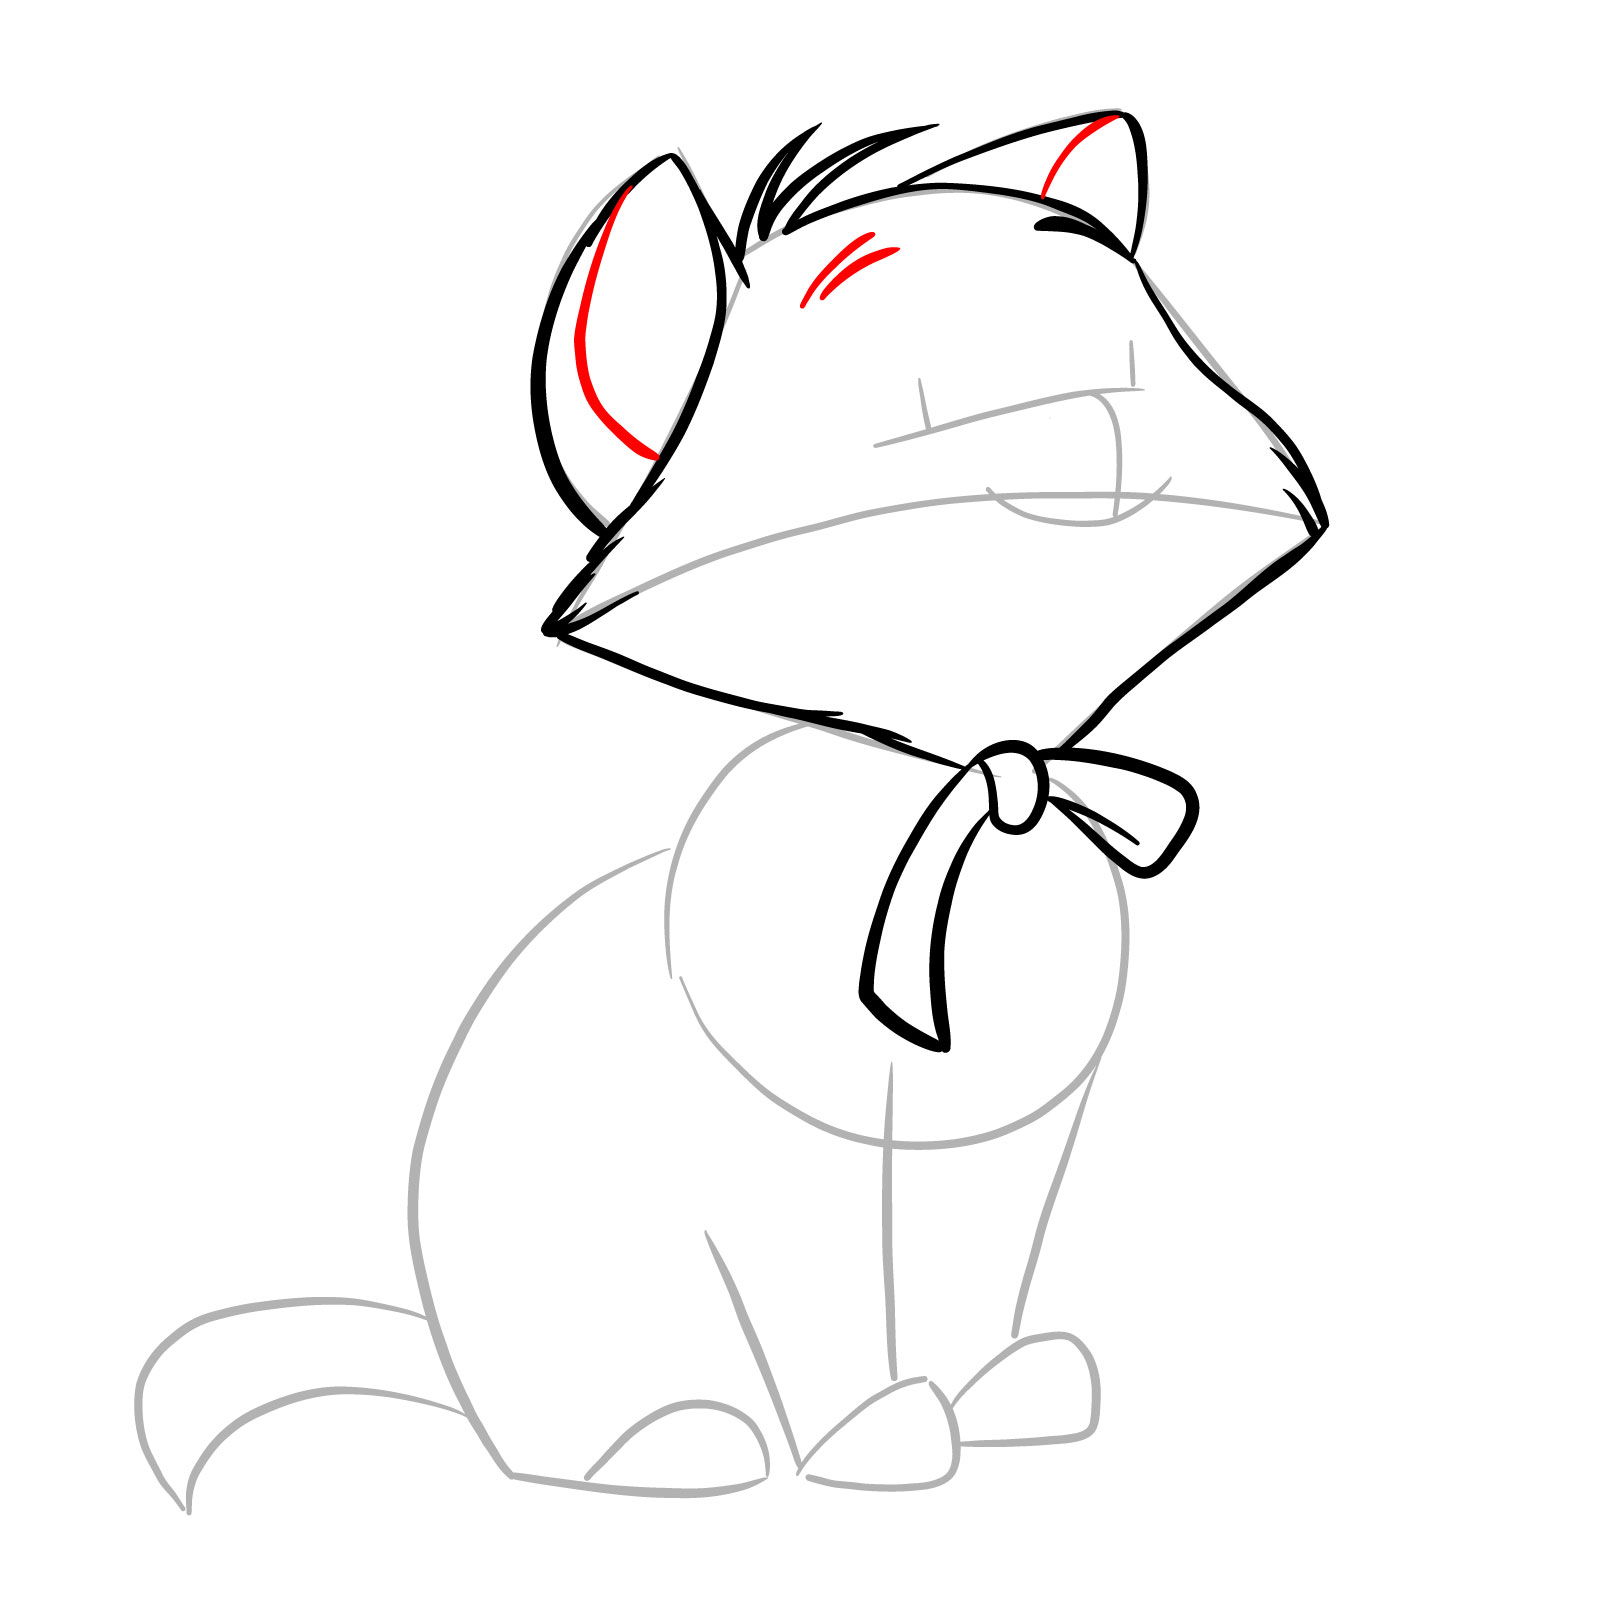 How to draw Berlioz from The Aristocats - step 10